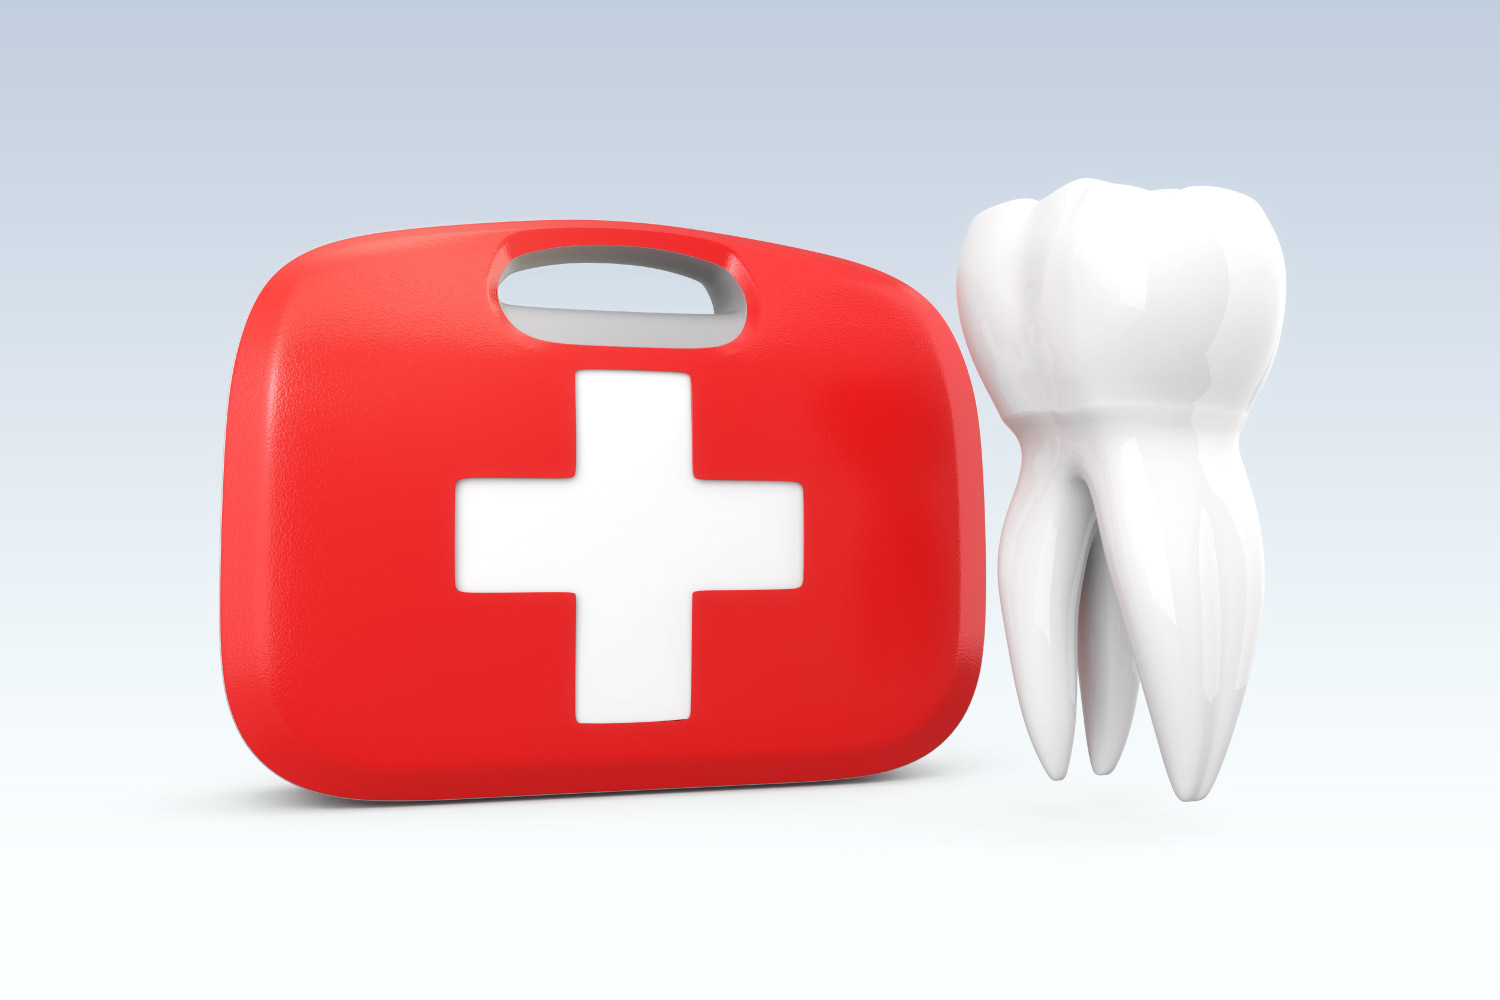 A white tooth floats next to a red and white emergency first aid kit